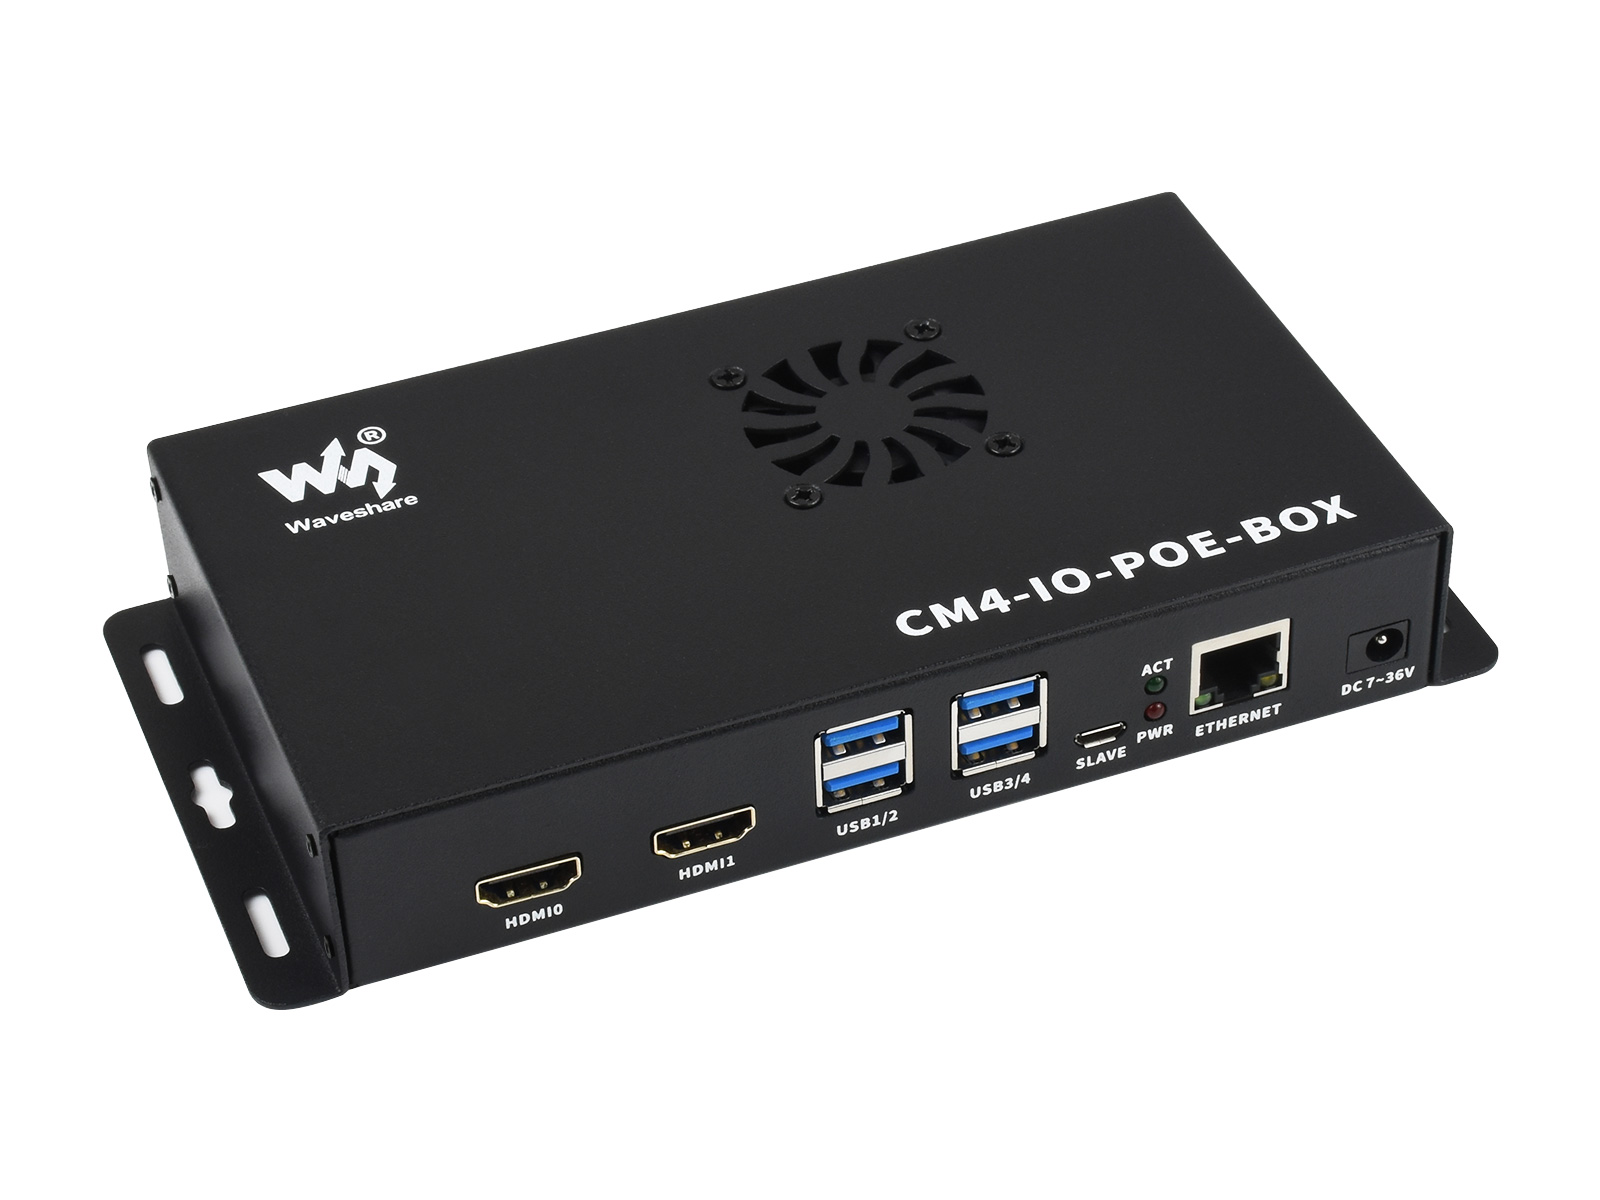 Waveshare NAS All-In-One Mini-Computer for RPi CM4 w/o CM4104008 (US) -  RobotShop